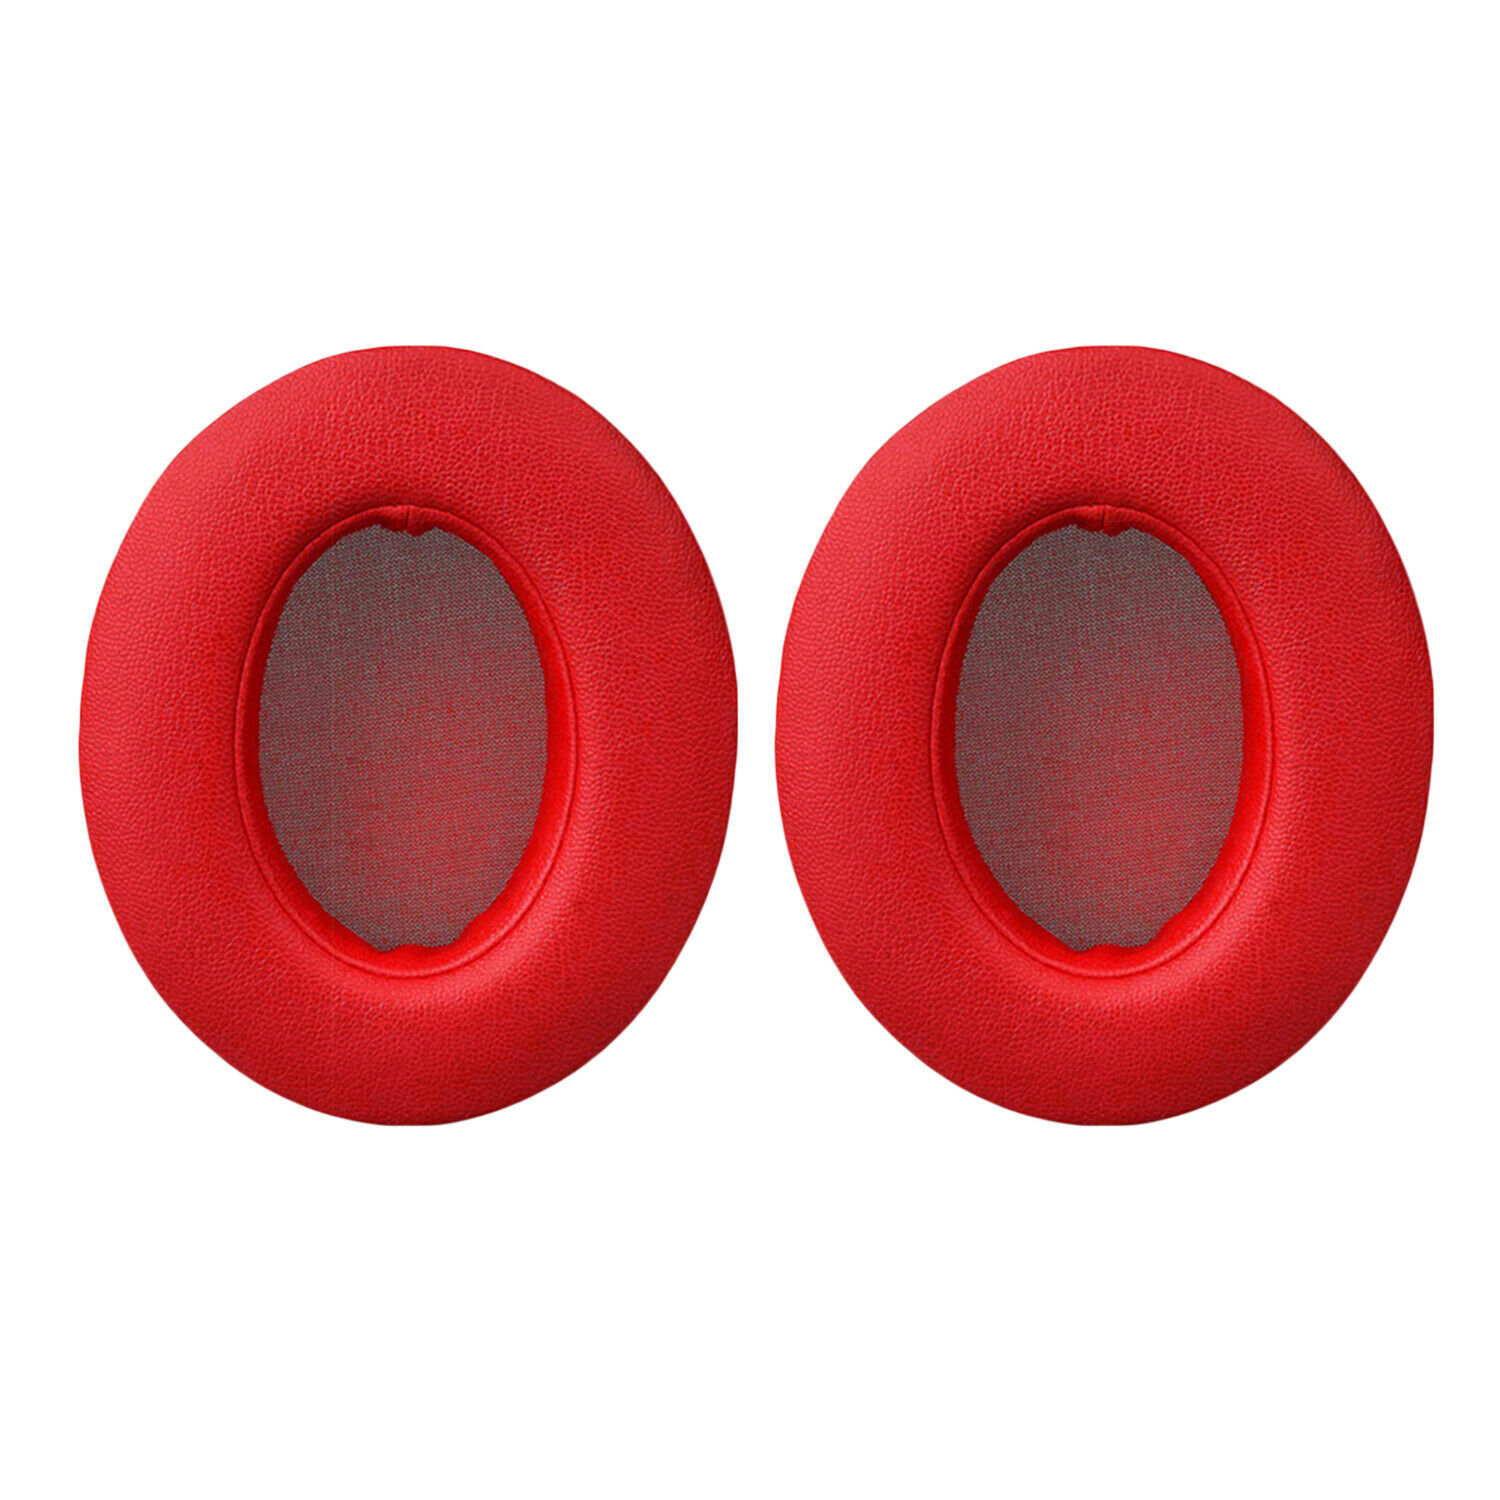 Soft Replacement Ear Pads for Studio Headphones